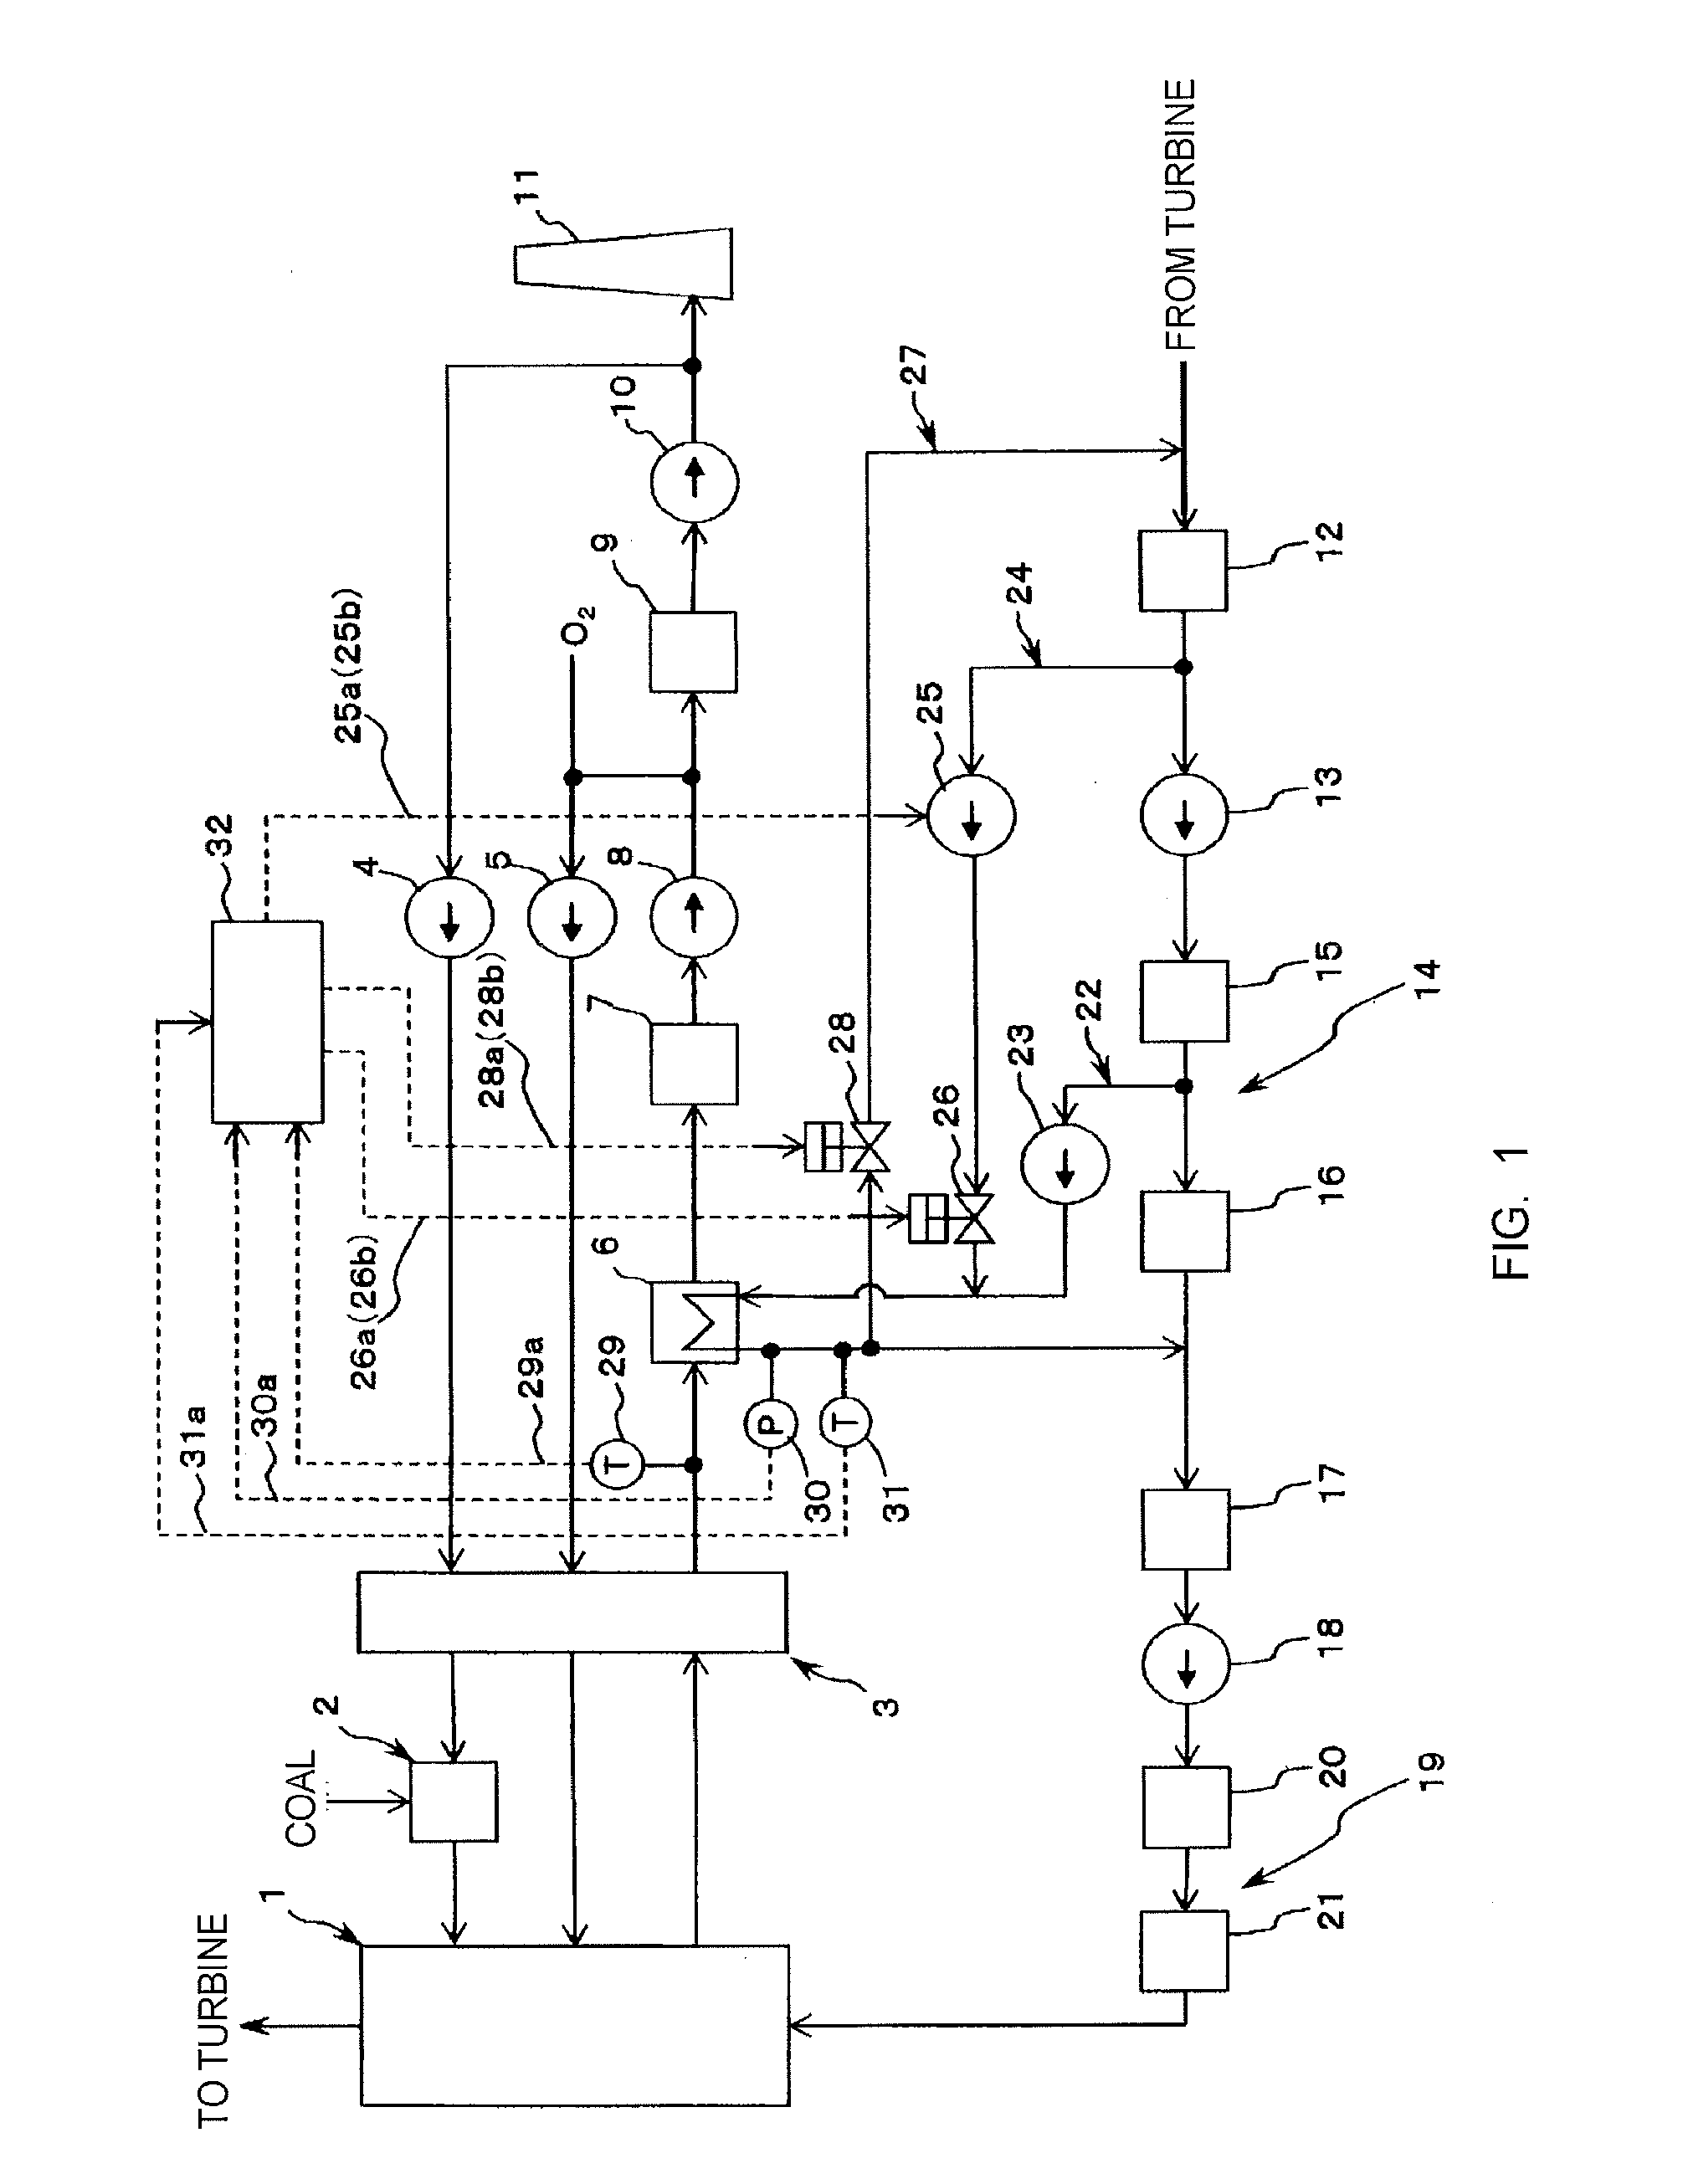 Device for preventing steam from being produced in flue gas cooler for oxyfuel combustion boiler